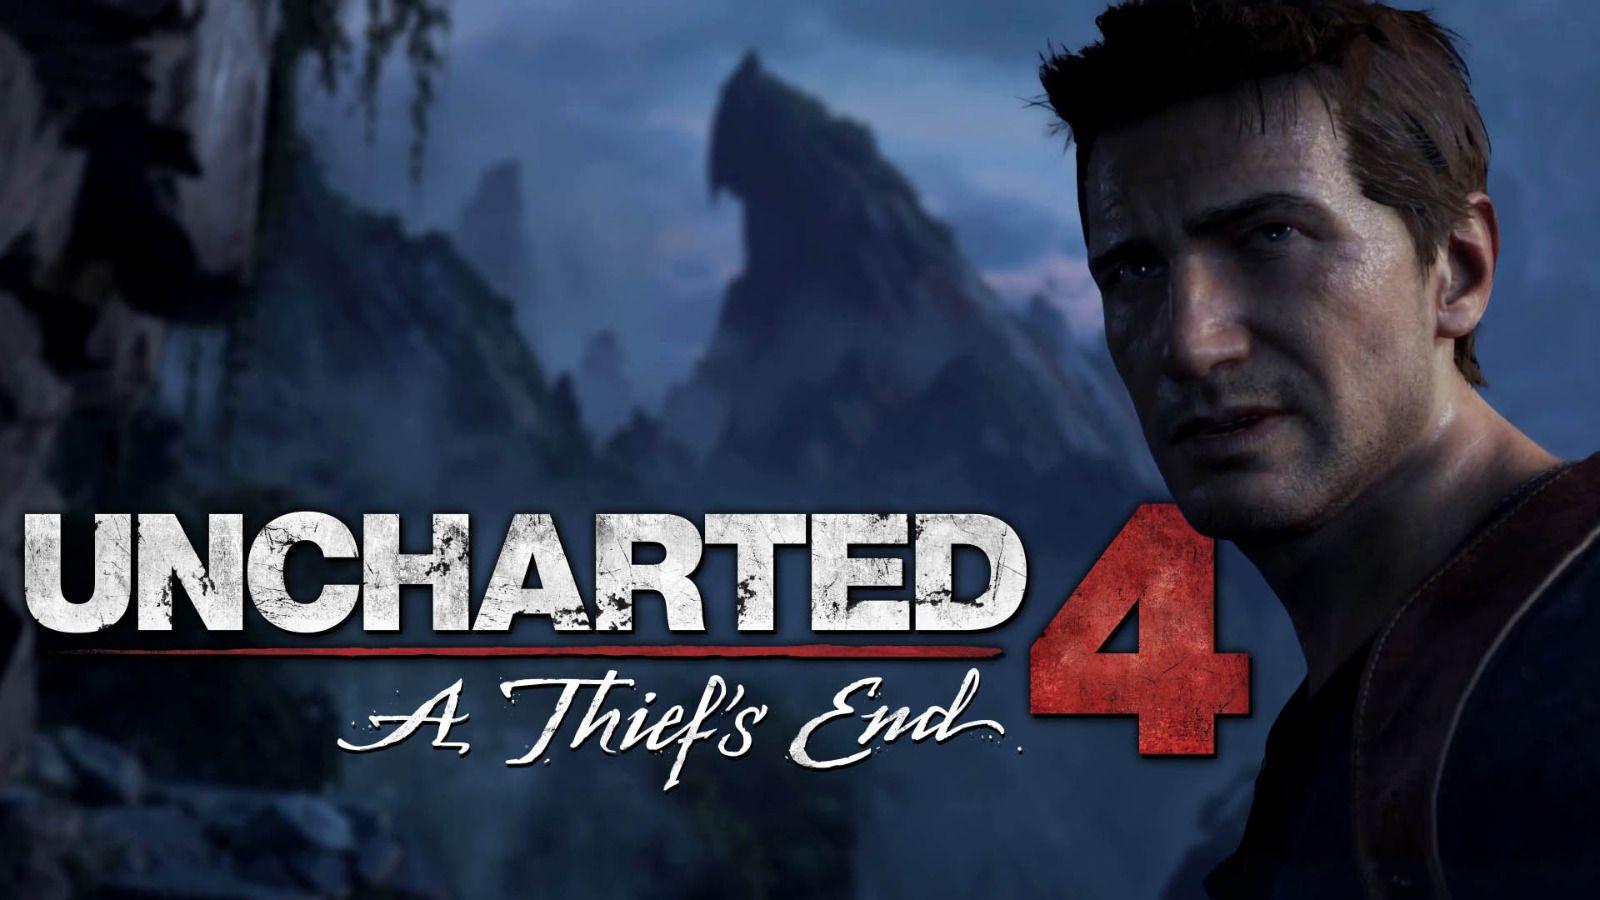 Uncharted 4: A Thief's End Walkthrough and Guide